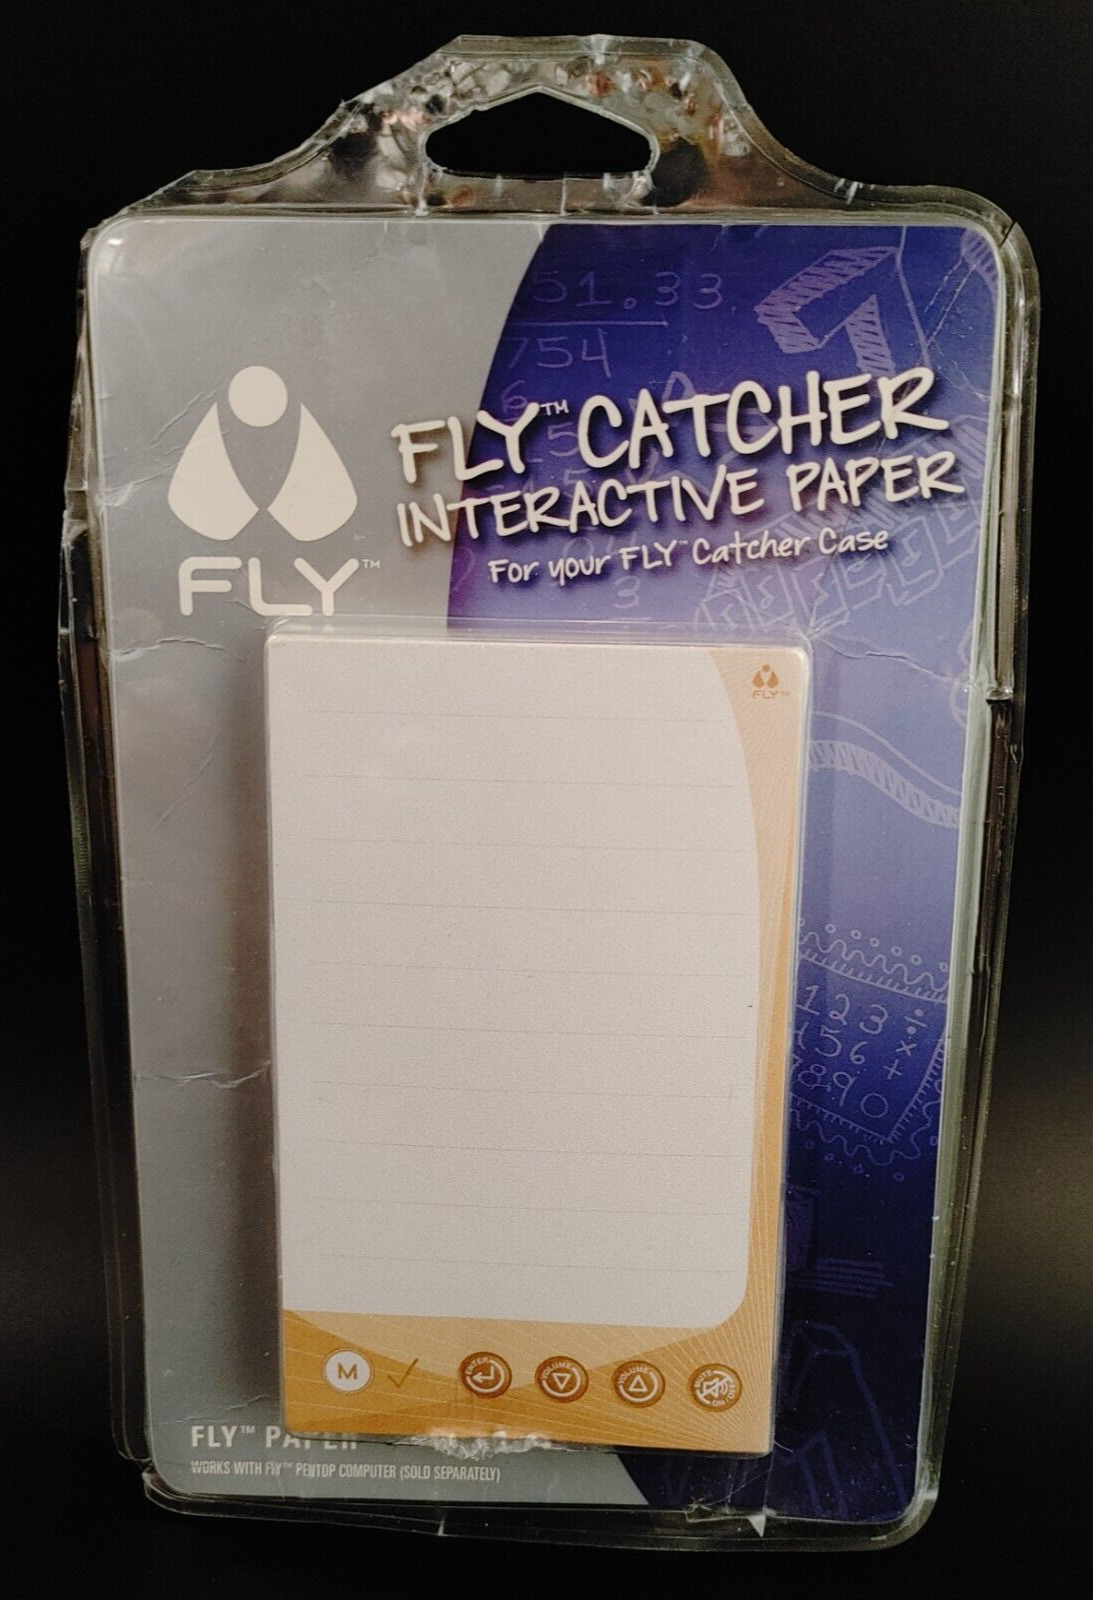 Fly Catcher INTERACTIVE FLY PAPER For Your Fly Catcher Case   New